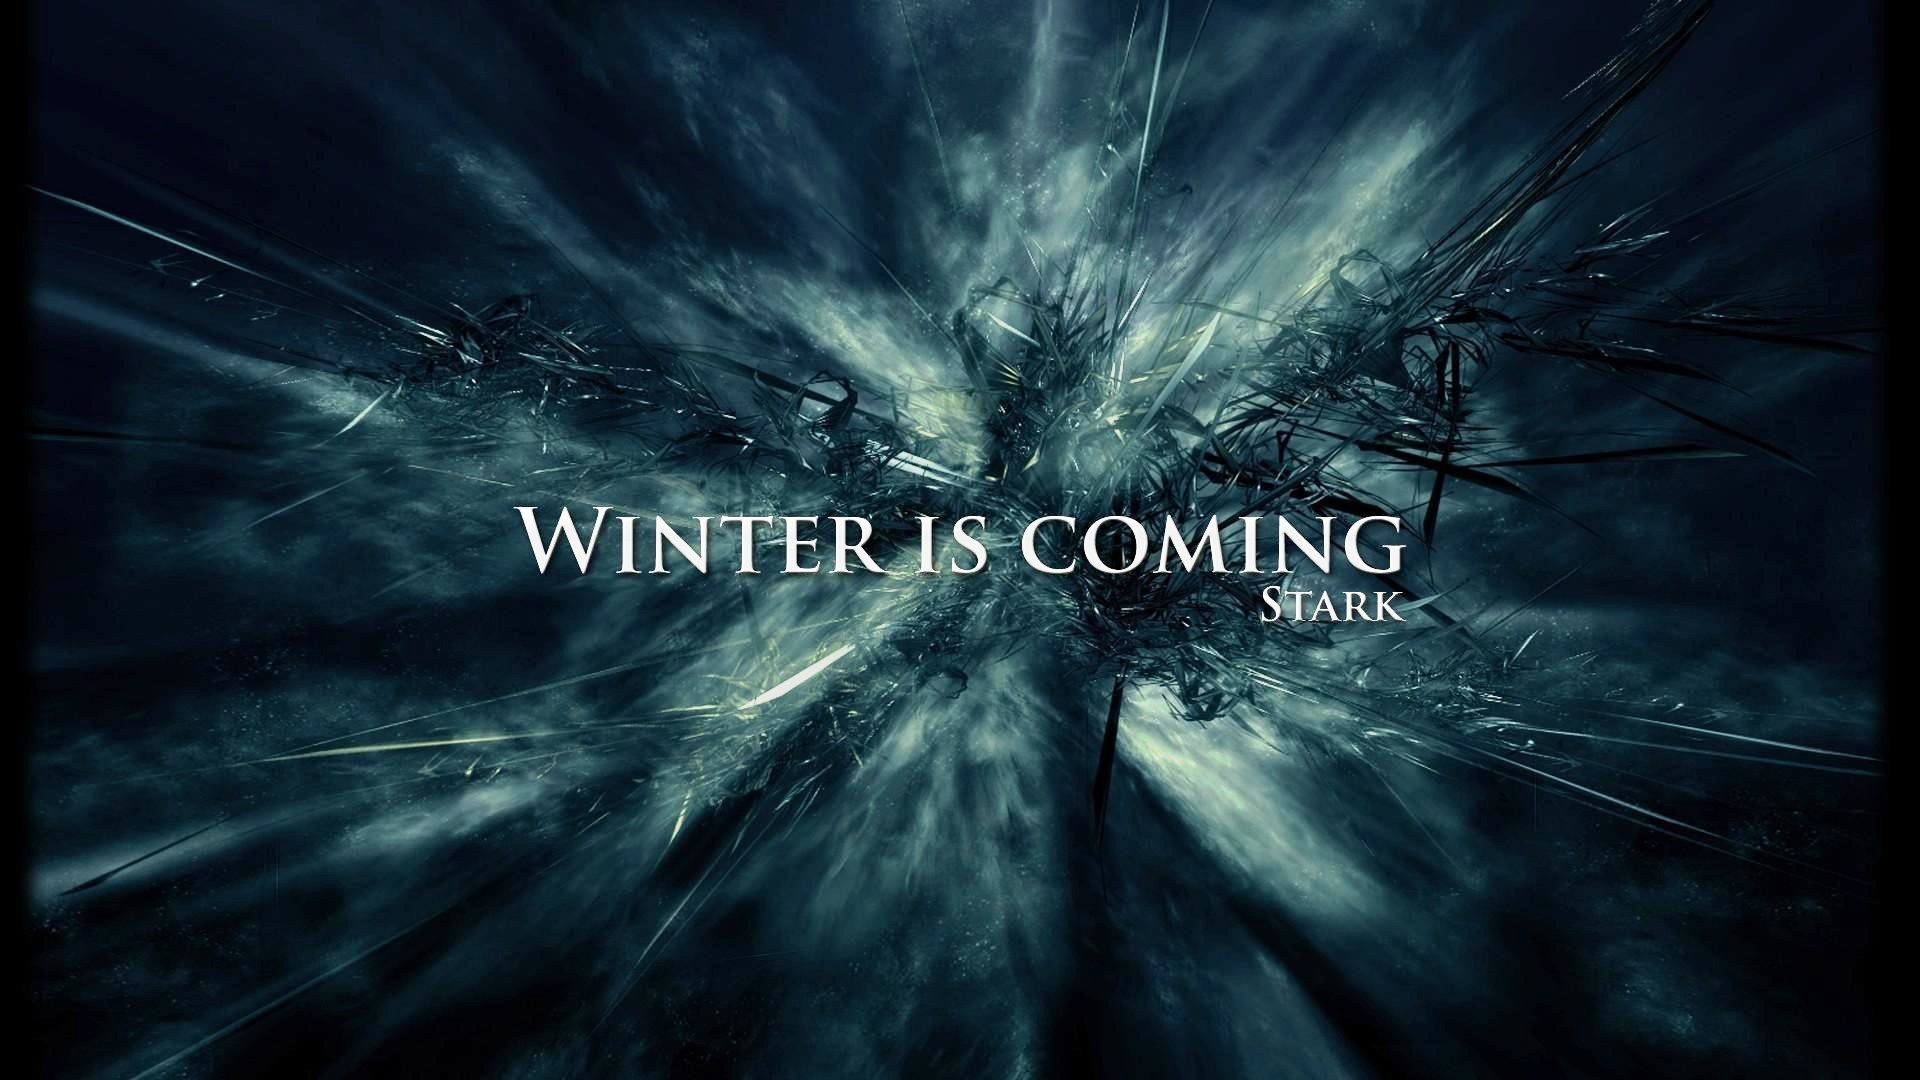 Game of Thrones Full Movie Wallpaper with high-resolution 1920x1080 pixel. You can use this poster wallpaper for your Desktop Computers, Mac Screensavers, Windows Backgrounds, iPhone Wallpapers, Tablet or Android Lock screen and another Mobile device